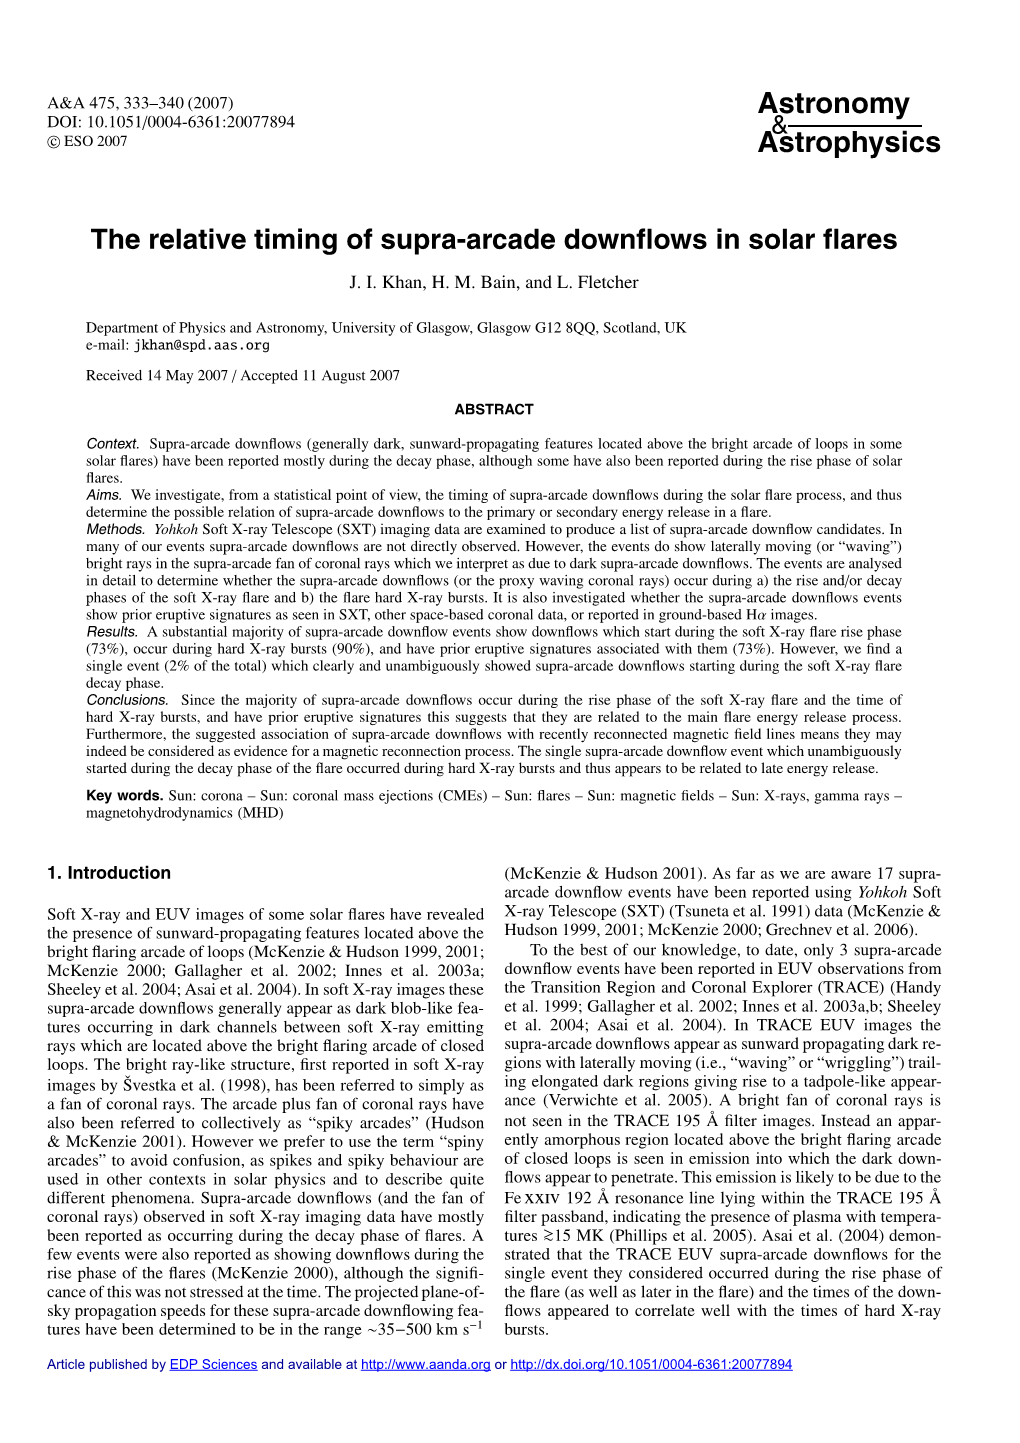 The Relative Timing of Supra-Arcade Downflows in Solar Flares